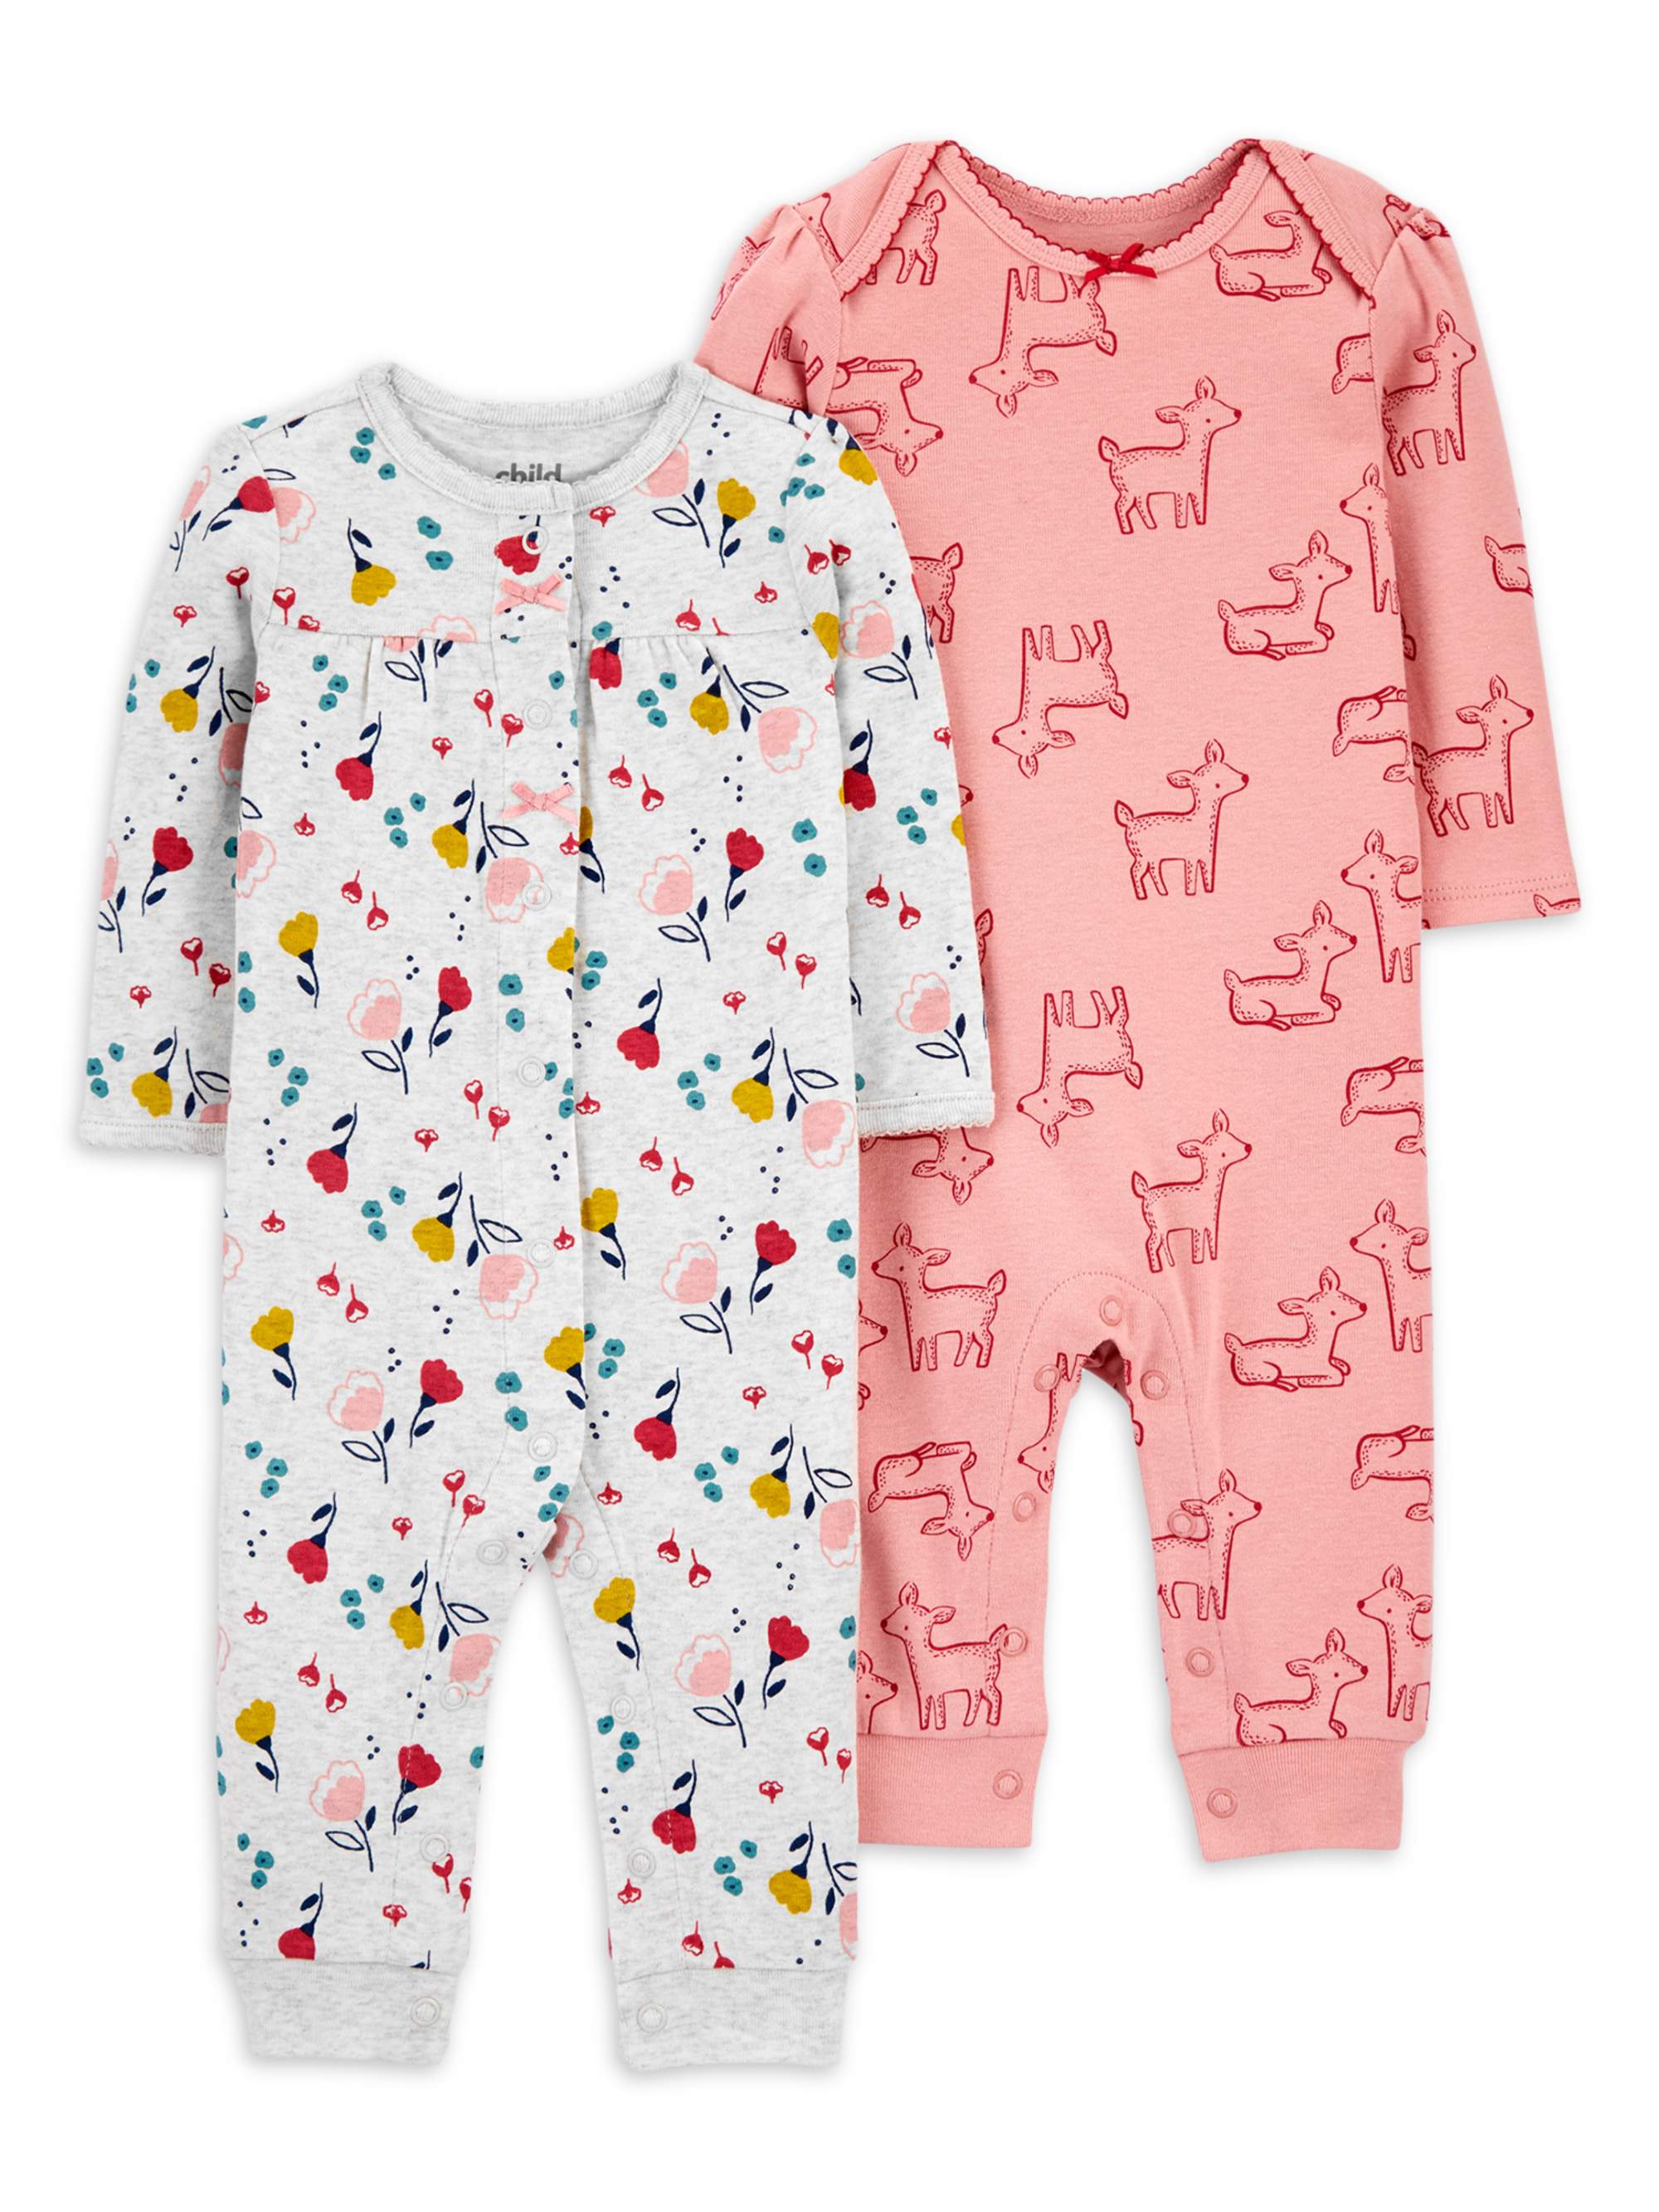 Carter's Child of Mine Baby Girl Footless Coveralls, 2-Pack - image 1 of 4